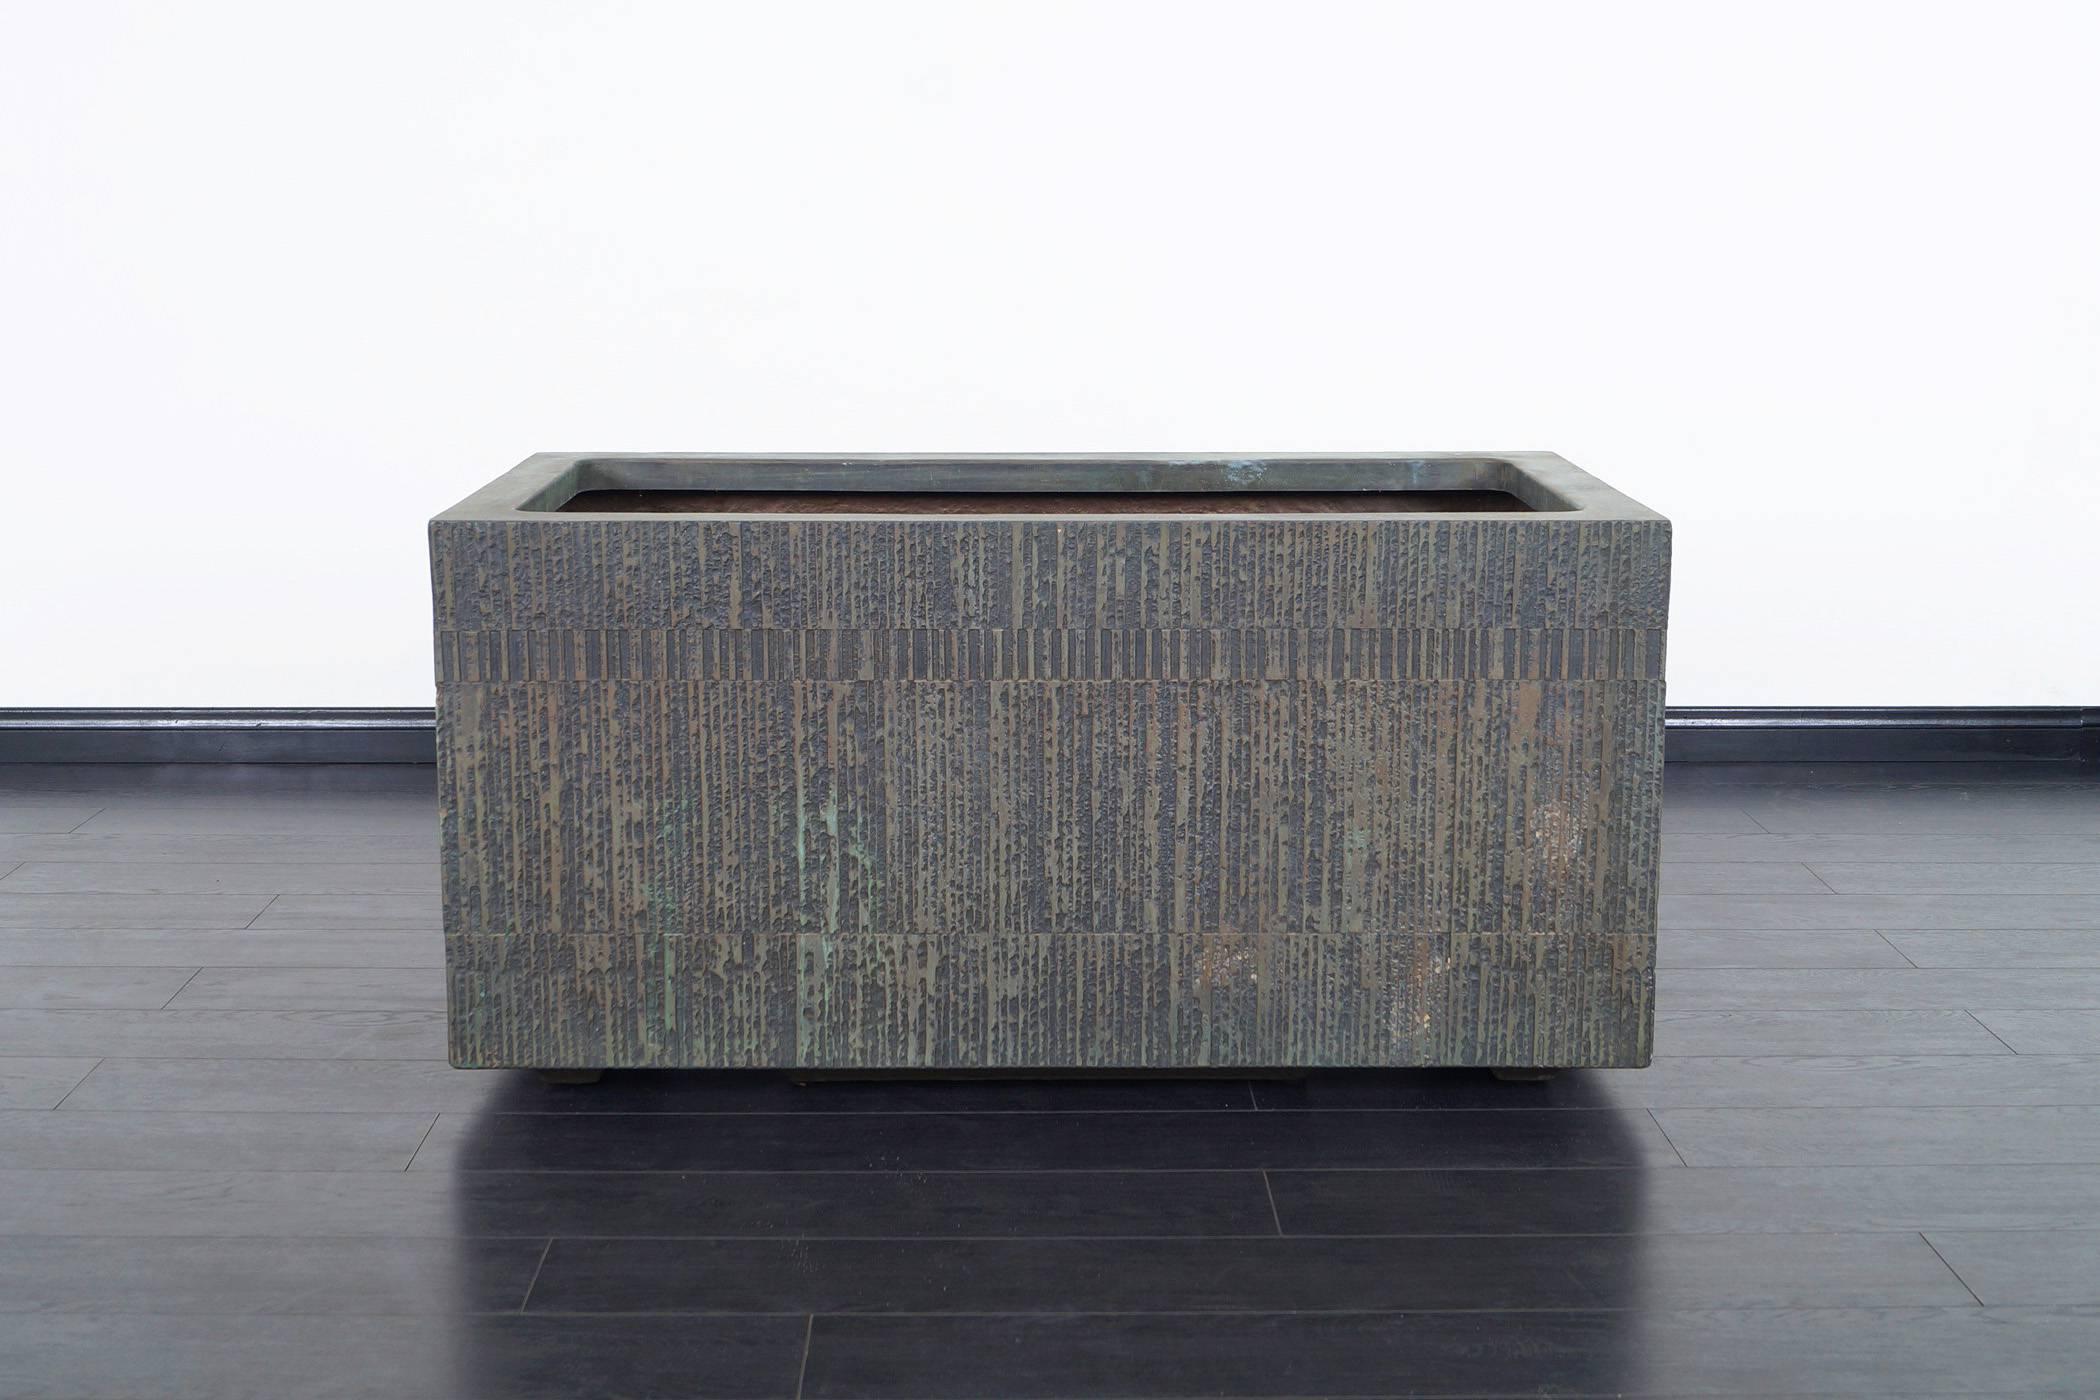 This massive cast bronze resin planter were designed by Forms and Surfaces. The interior are black fiberglass.